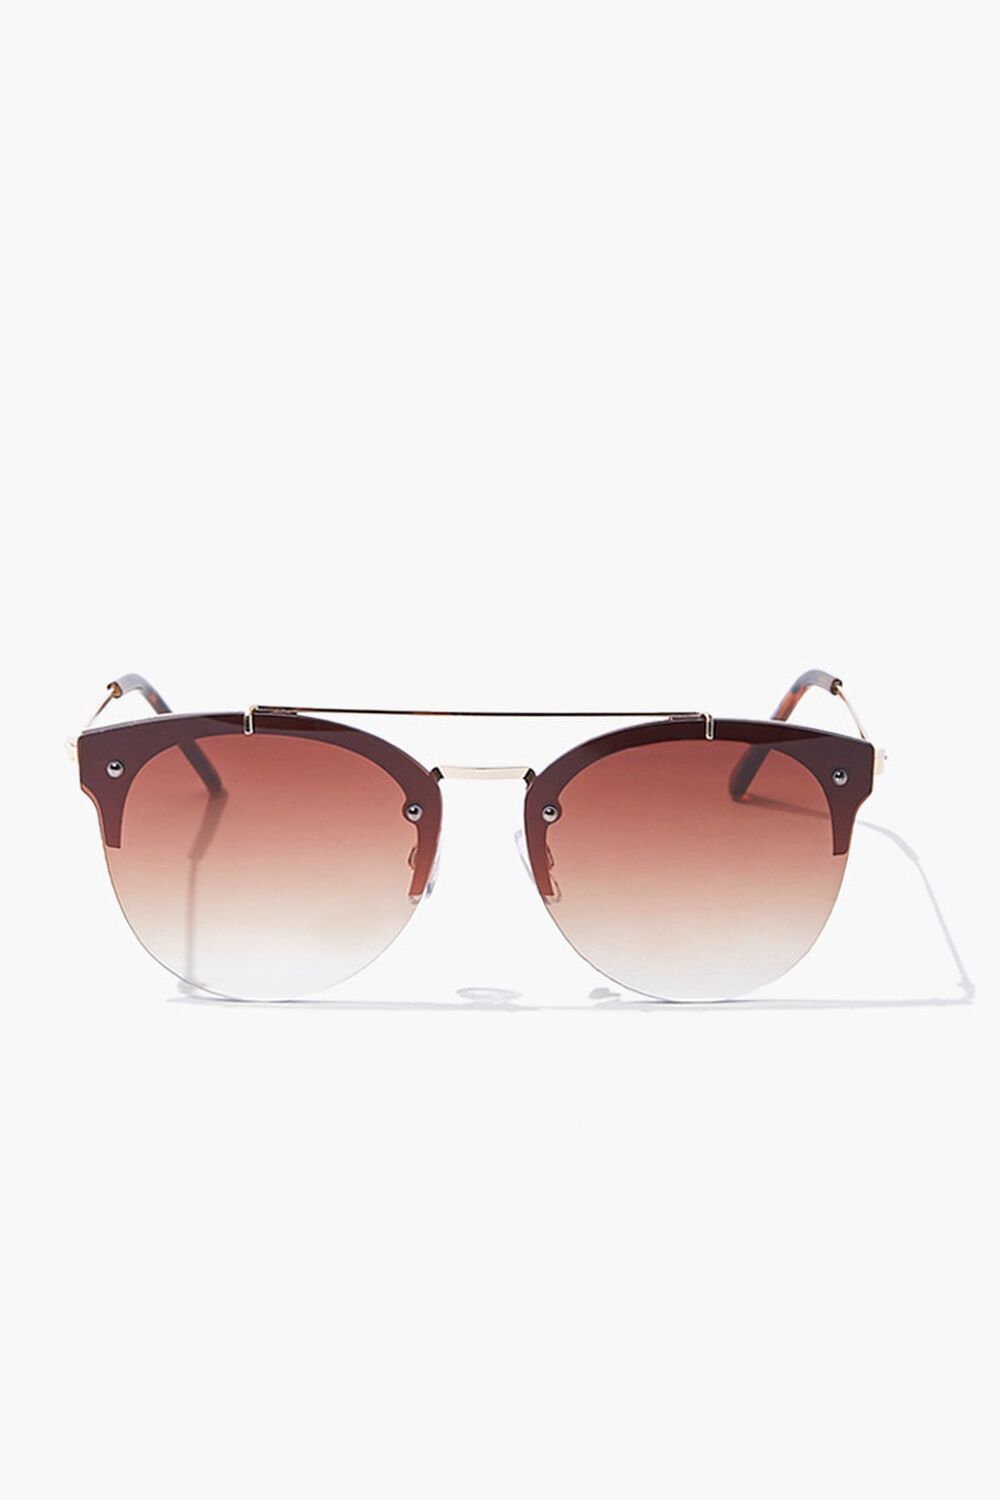 GOLD/BROWN Round Metal Sunglasses, image 1